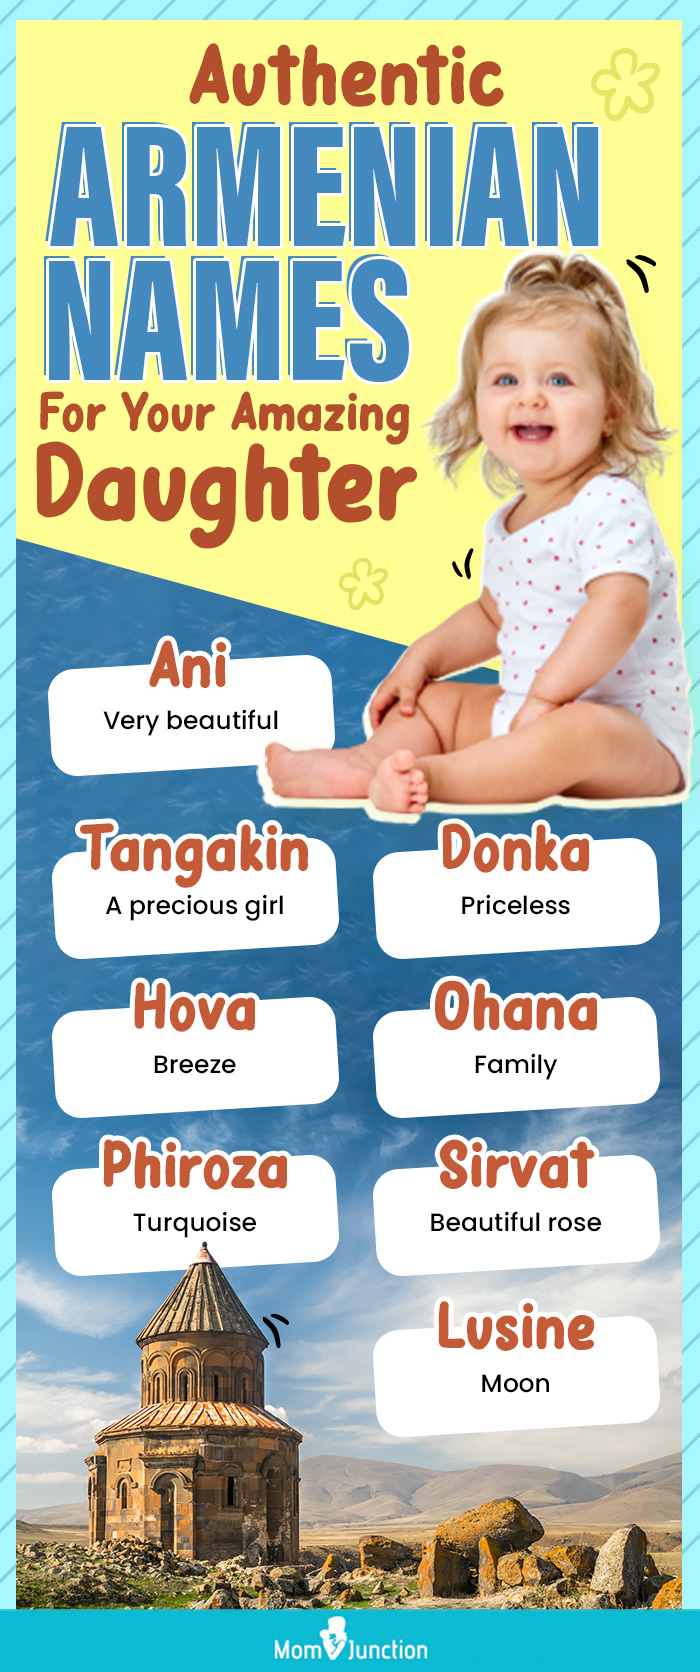 authentic armenian names for your amazing daughter (infographic)